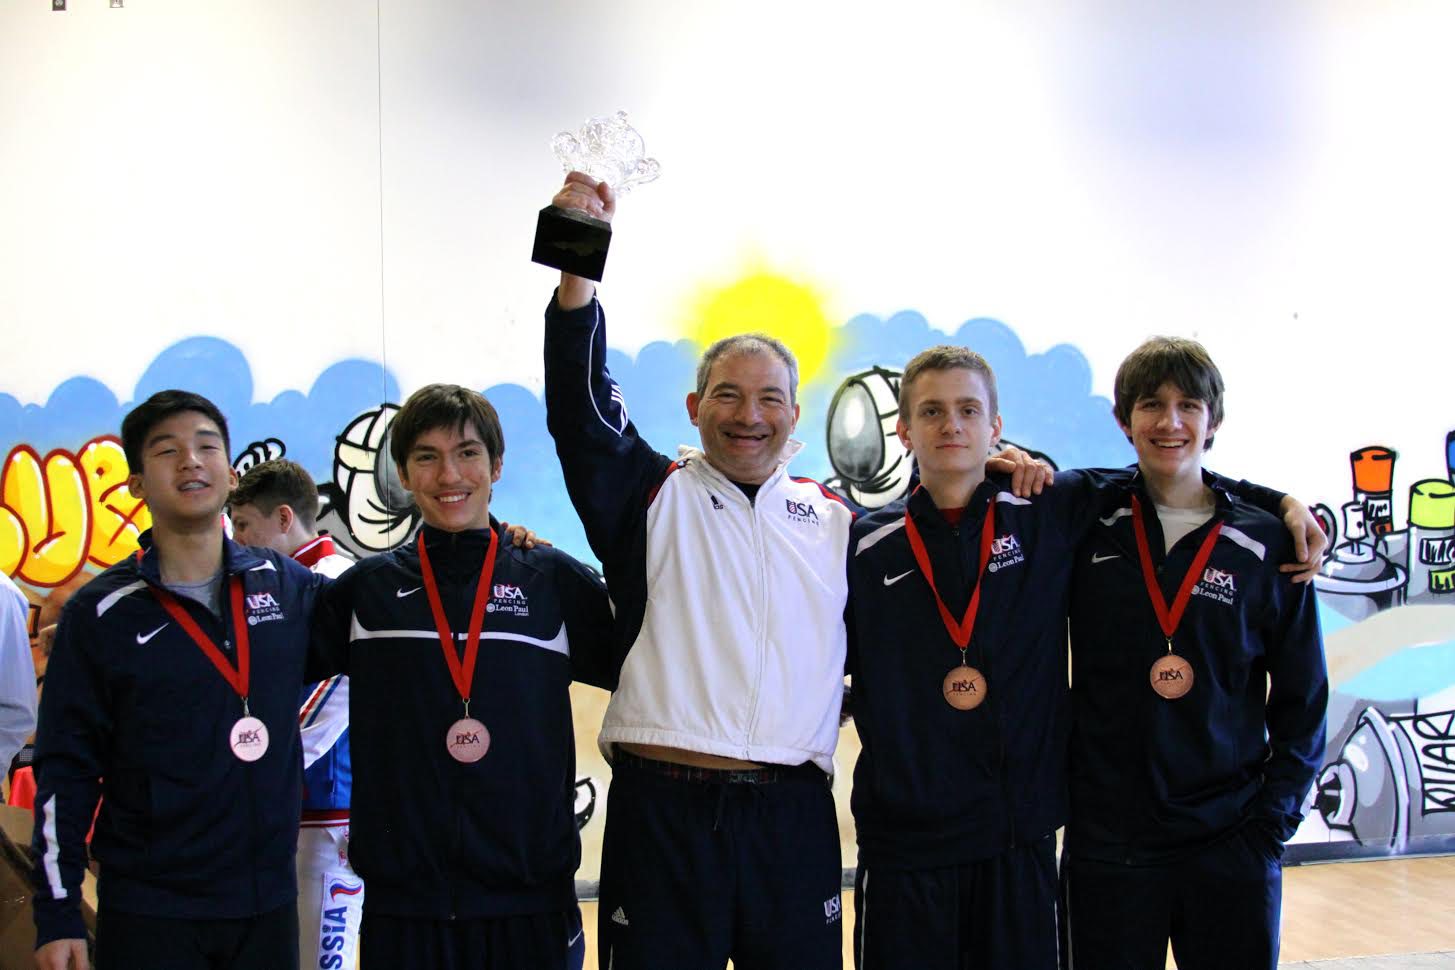 Spartak club of San Diego won a bronze medal in the team event at a Junior World Cup